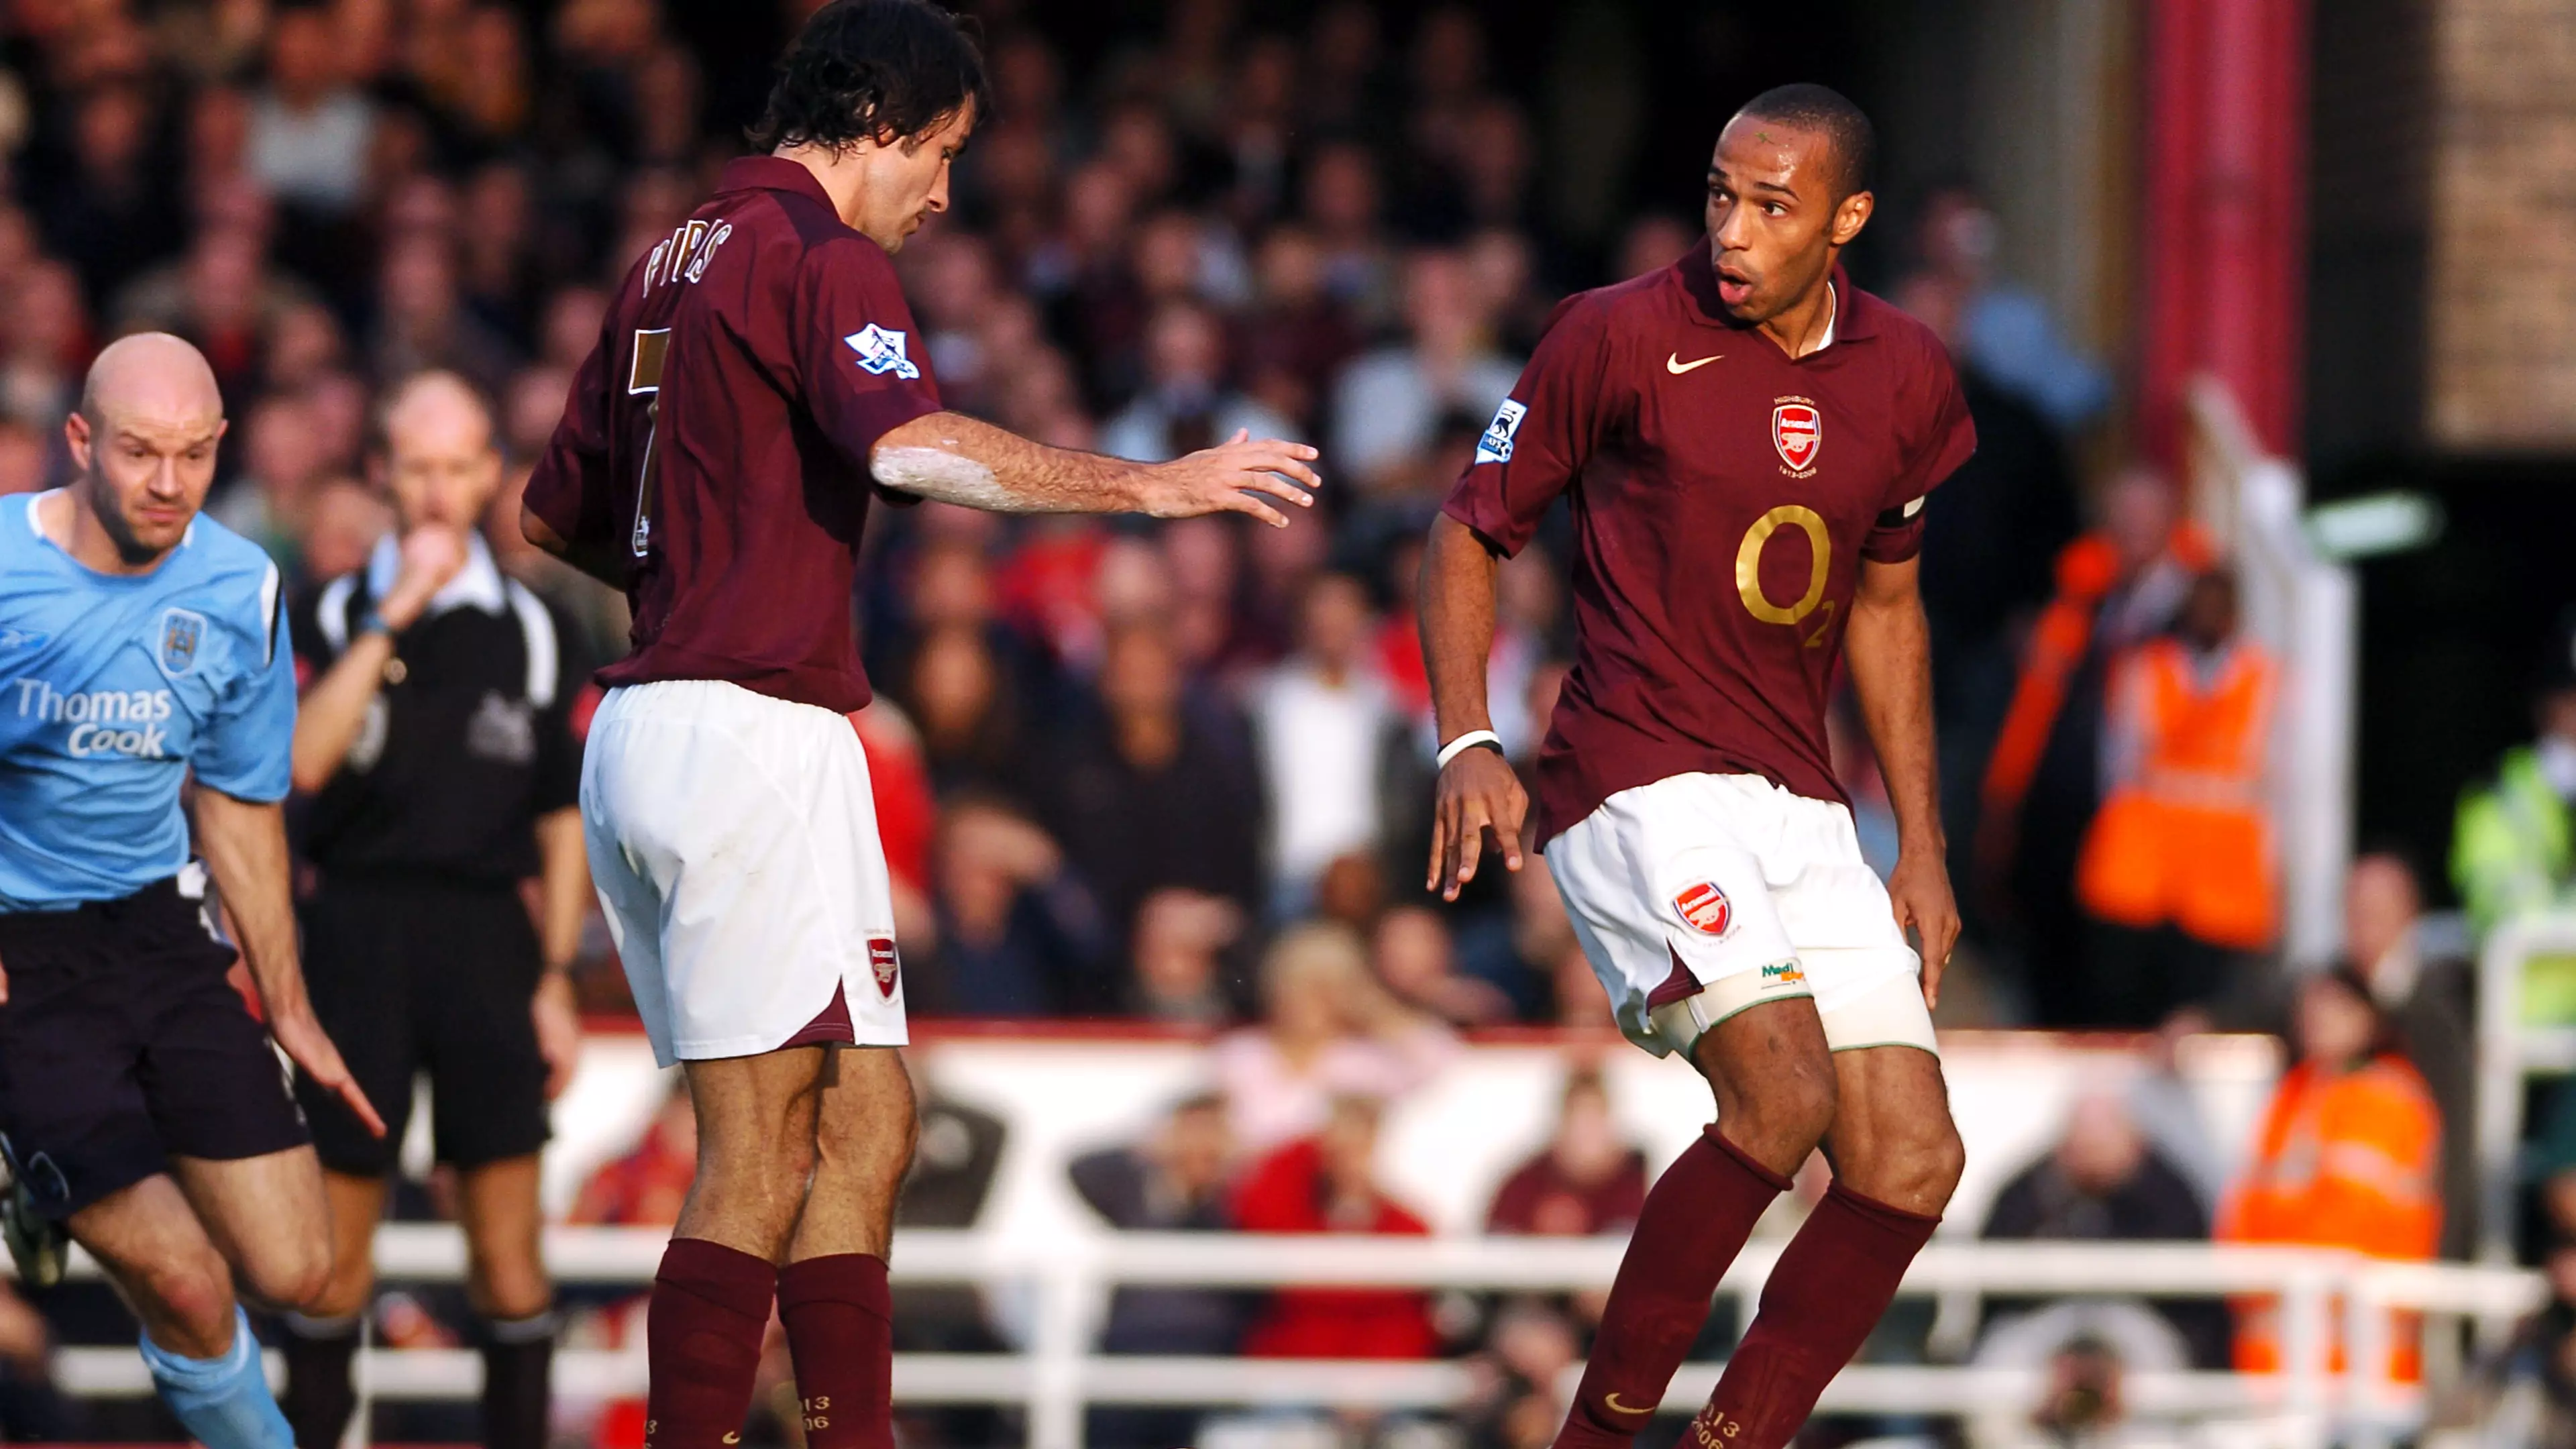 Robert Pires Talks About That Penalty With Thierry Henry